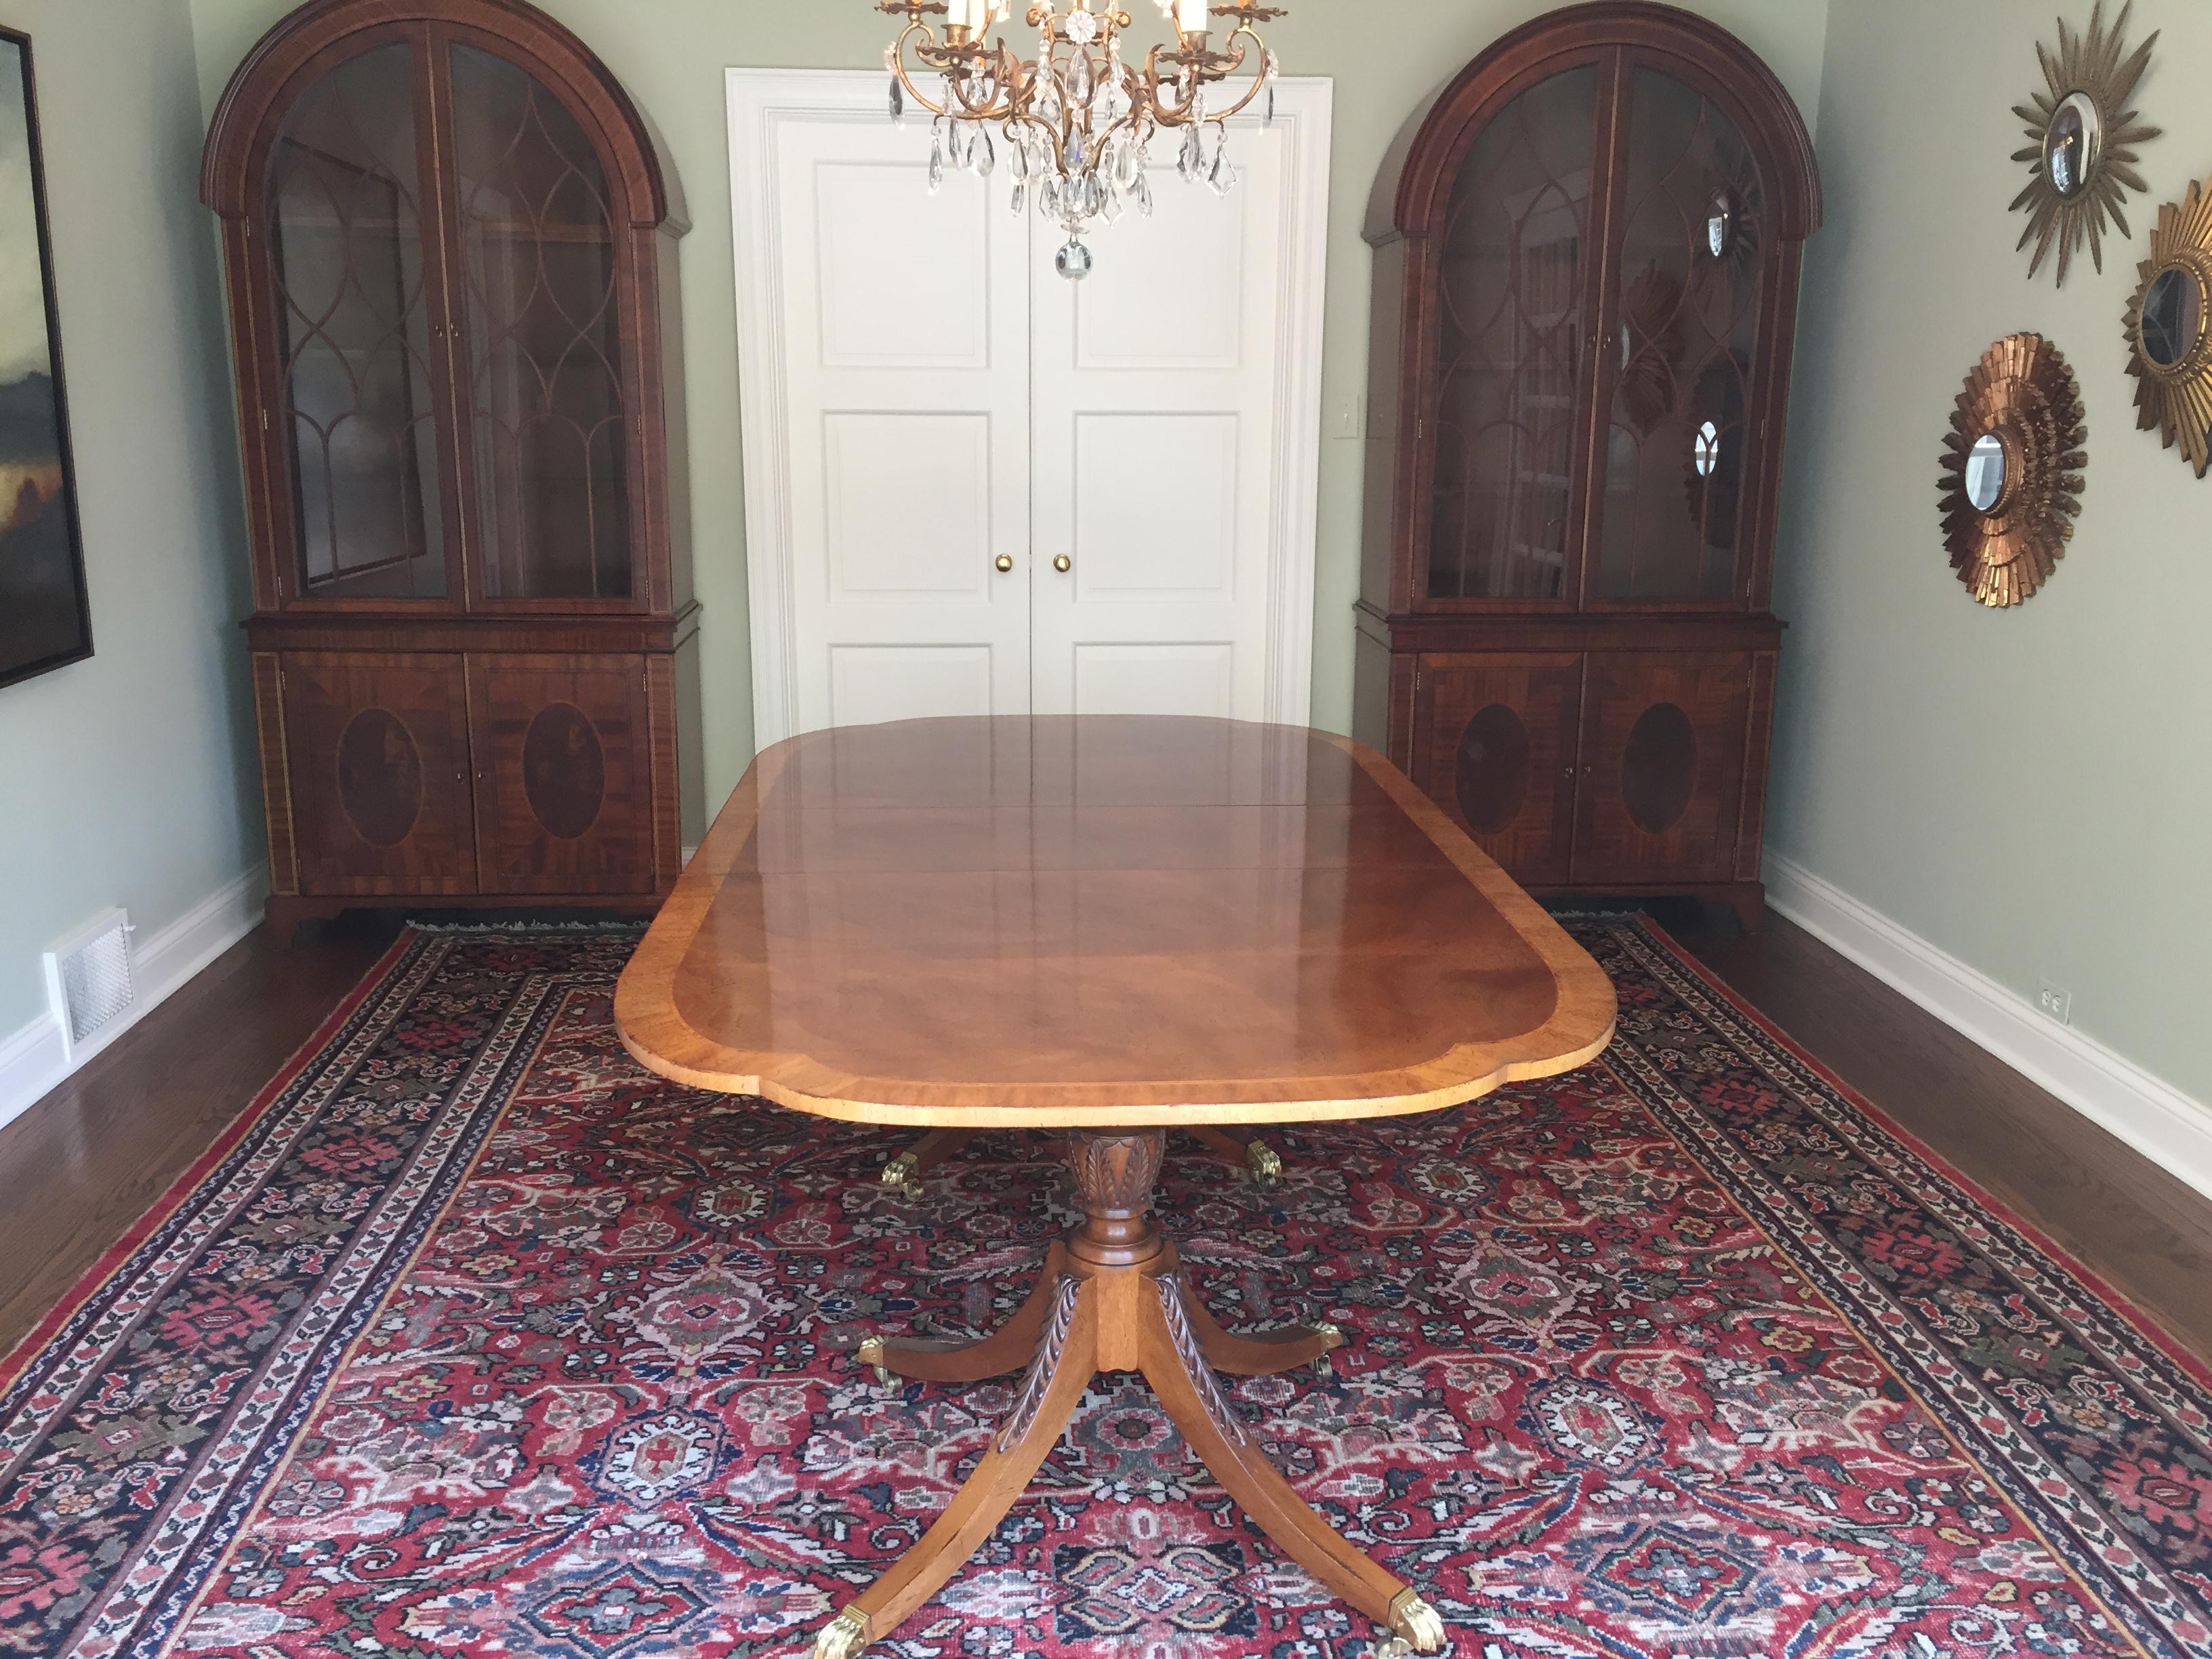 Baker furniture historical Charleston collection 
This elegant dining table has two pedestals with brass capped feet, three leaves and $1000 of custom Baker pads 

Meaasures: 70 wide, with three leaves that are 16.25 each
102